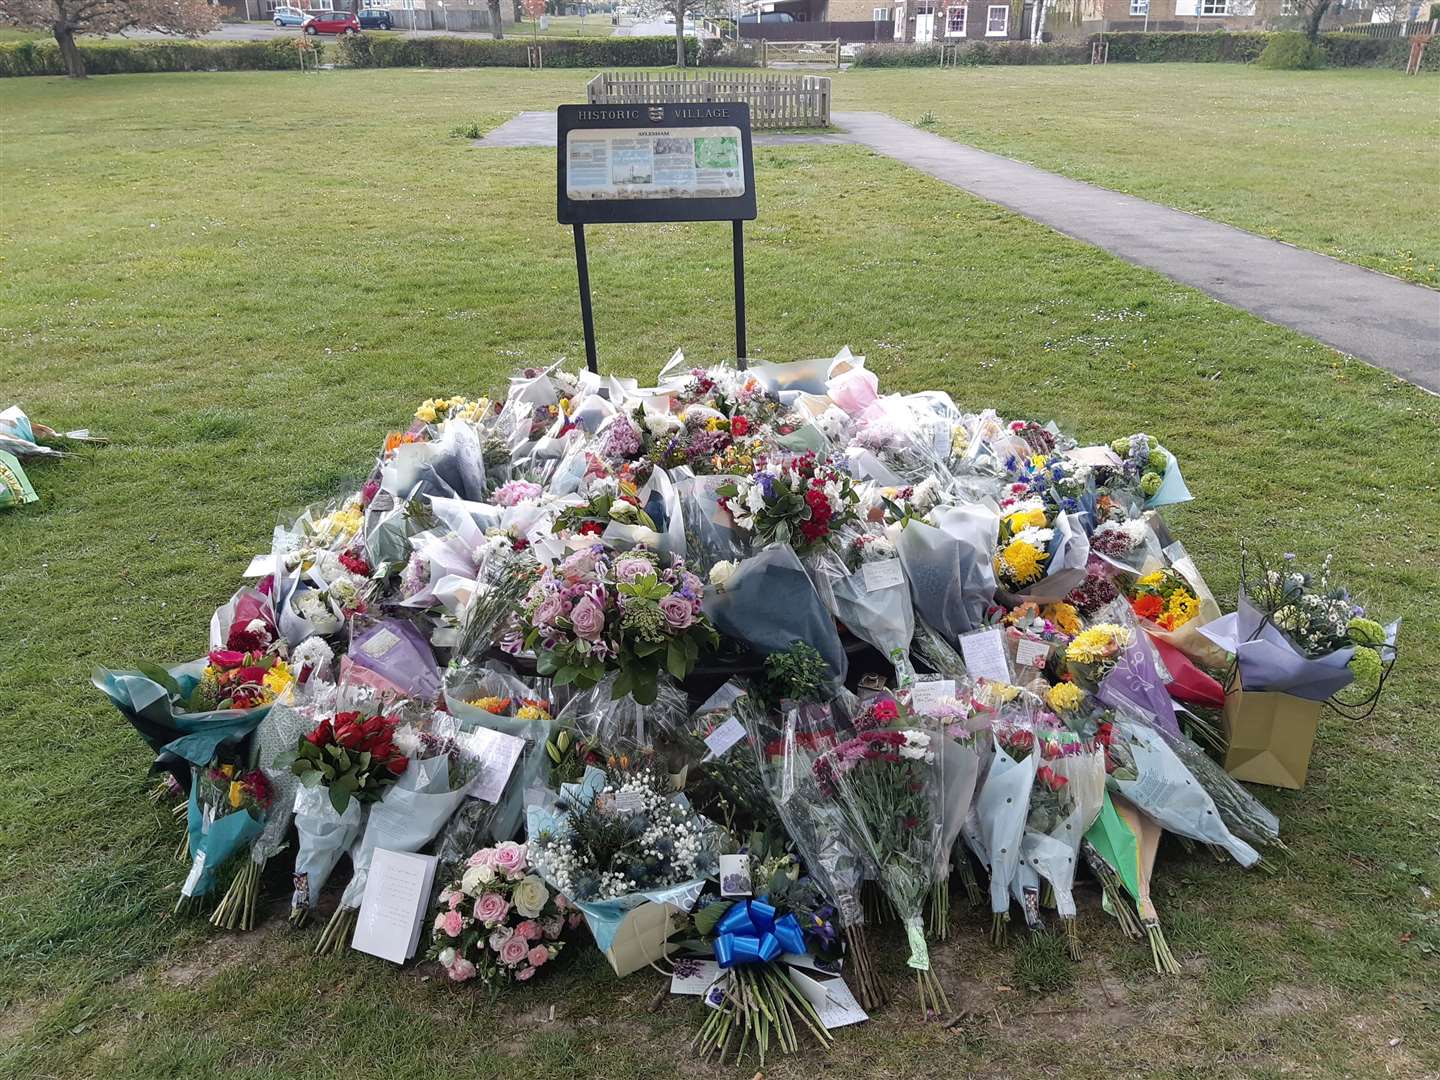 The amount of of floral tributes for Julia James in Aylesham increased in the days after her death